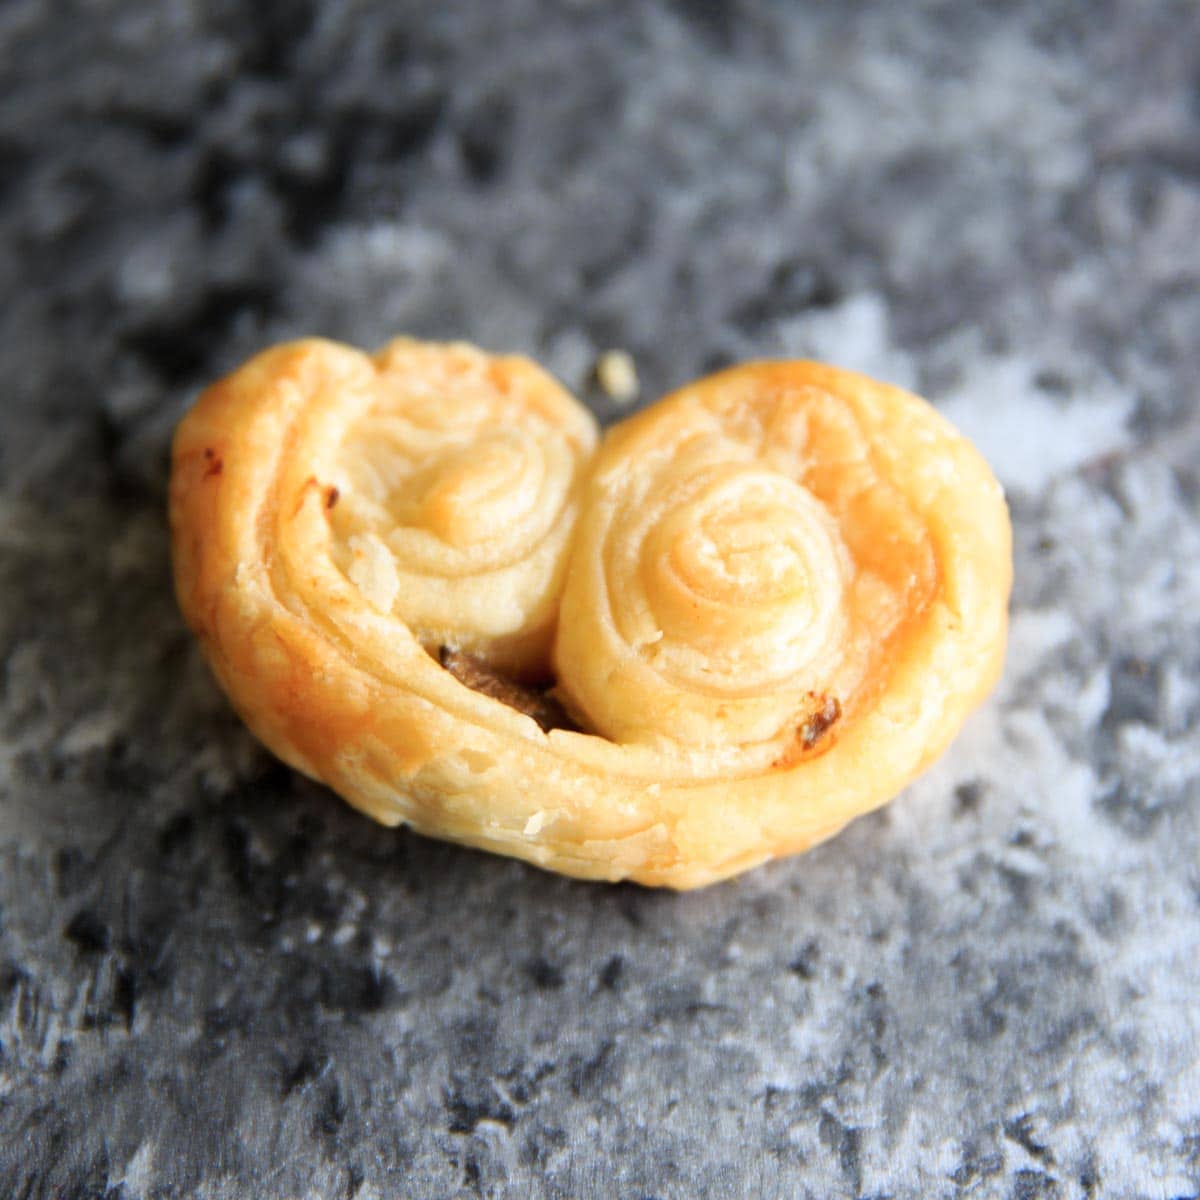 puff pastry baked into an "elephant ear" or palmier